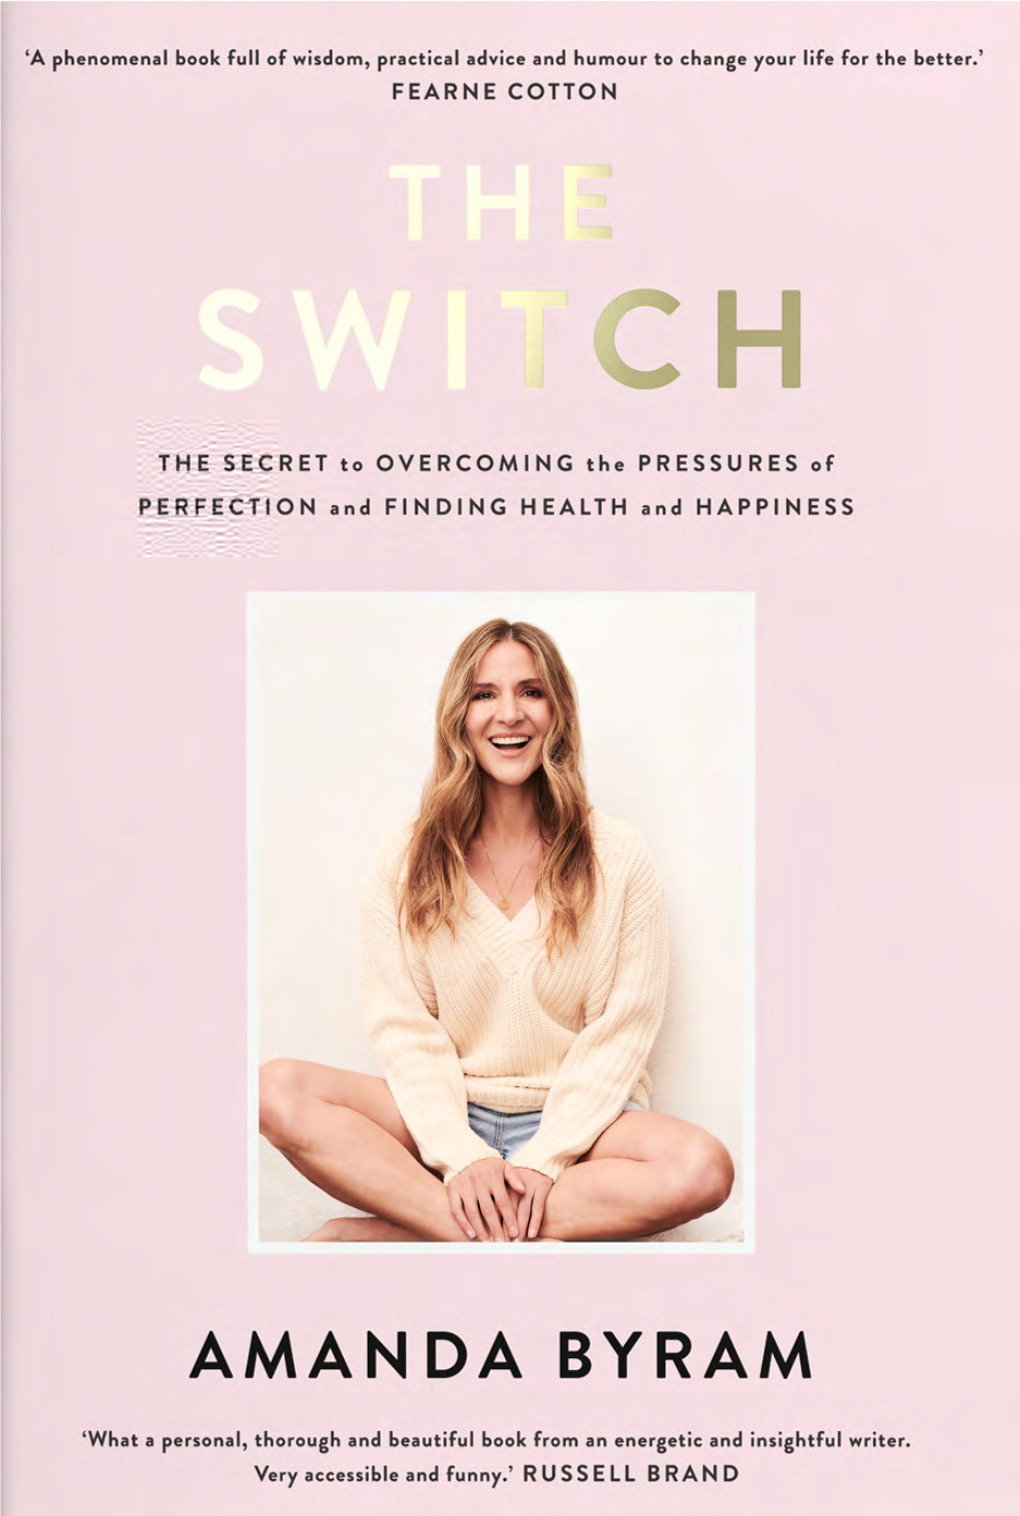 The Switch to a Healthier Mind and Body, This Book Is an Absolute Gem